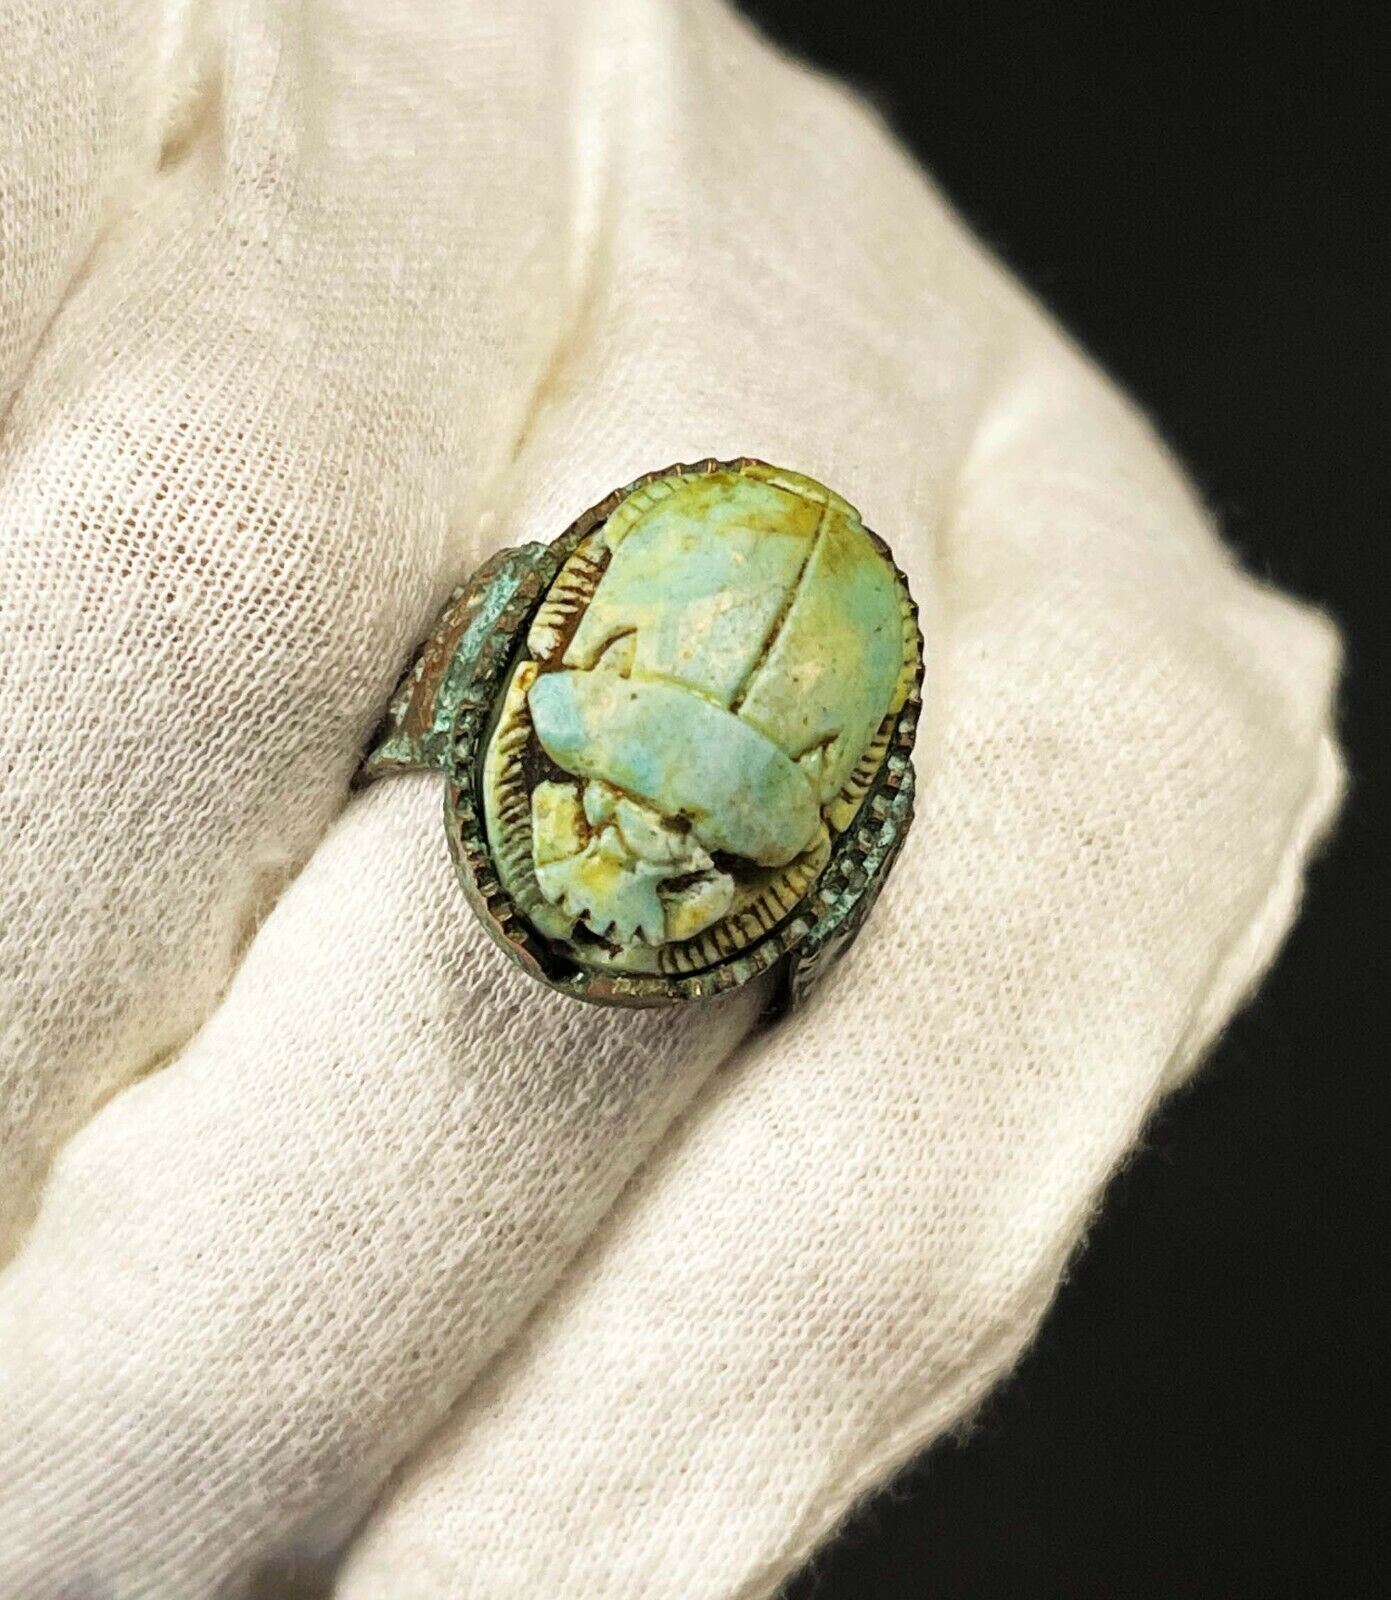 Rare Ancient Egyptian Scarab Ring with the beautiful Details